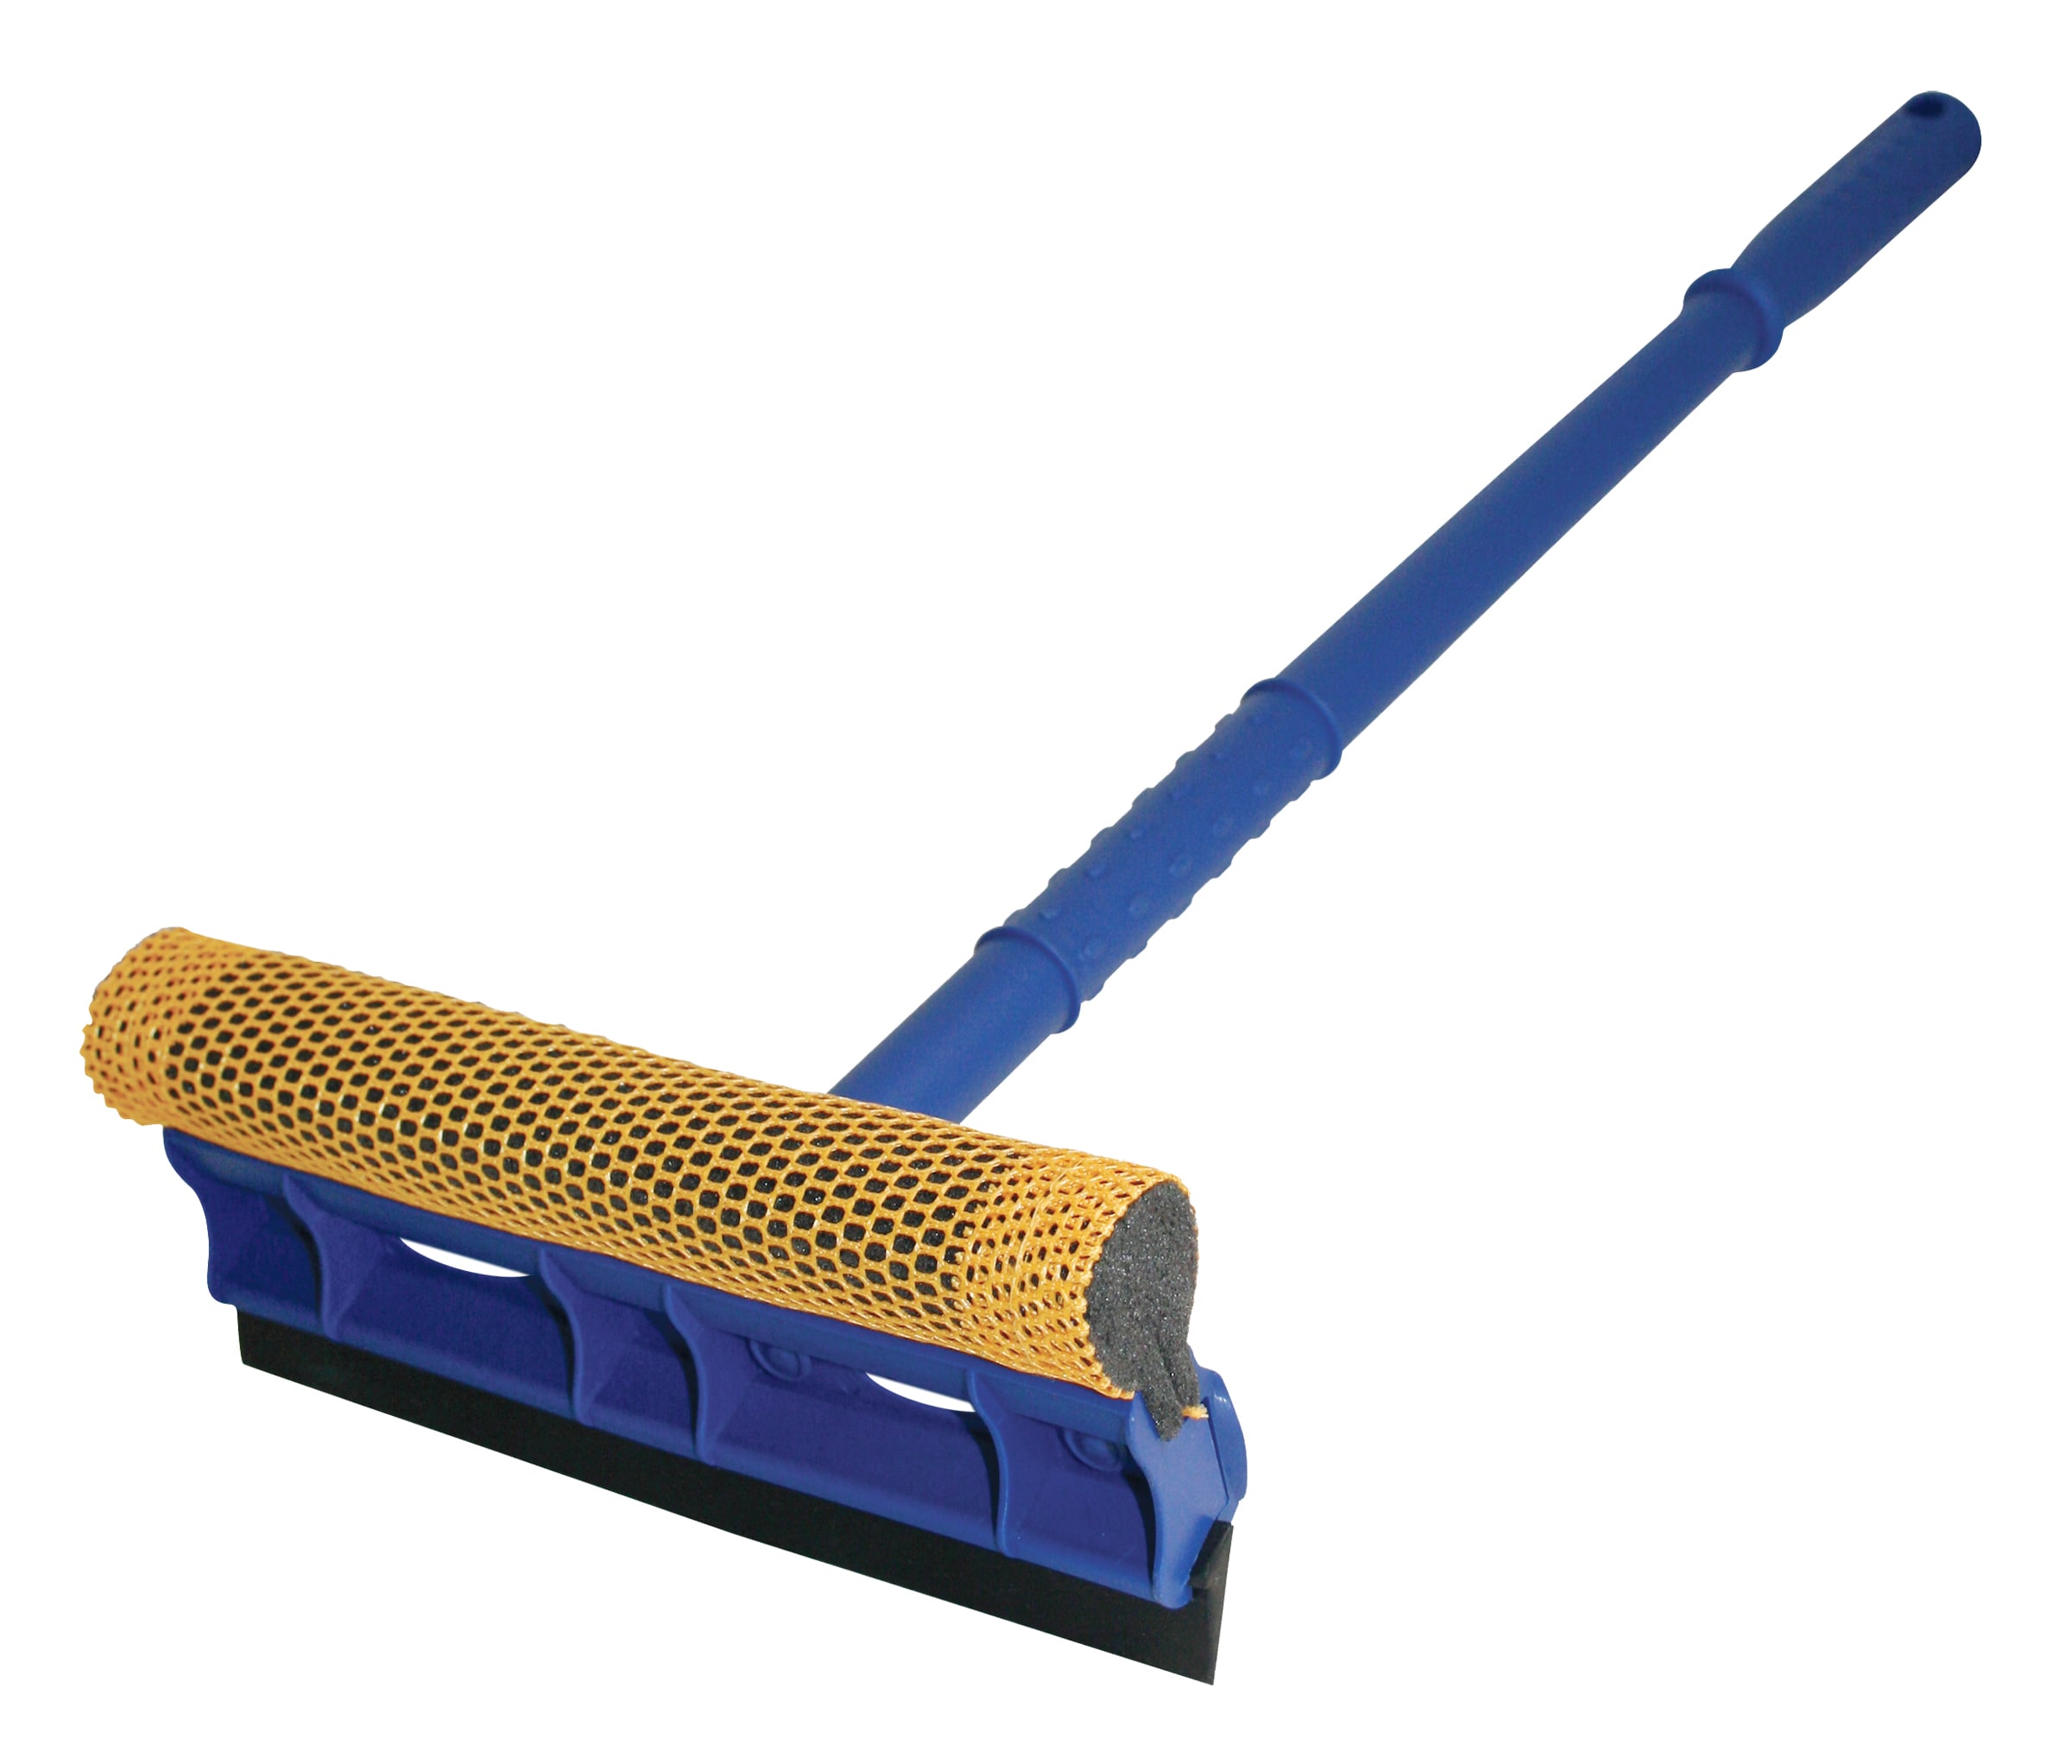 8 inch Squeegee with 20 inch Handle, Blue